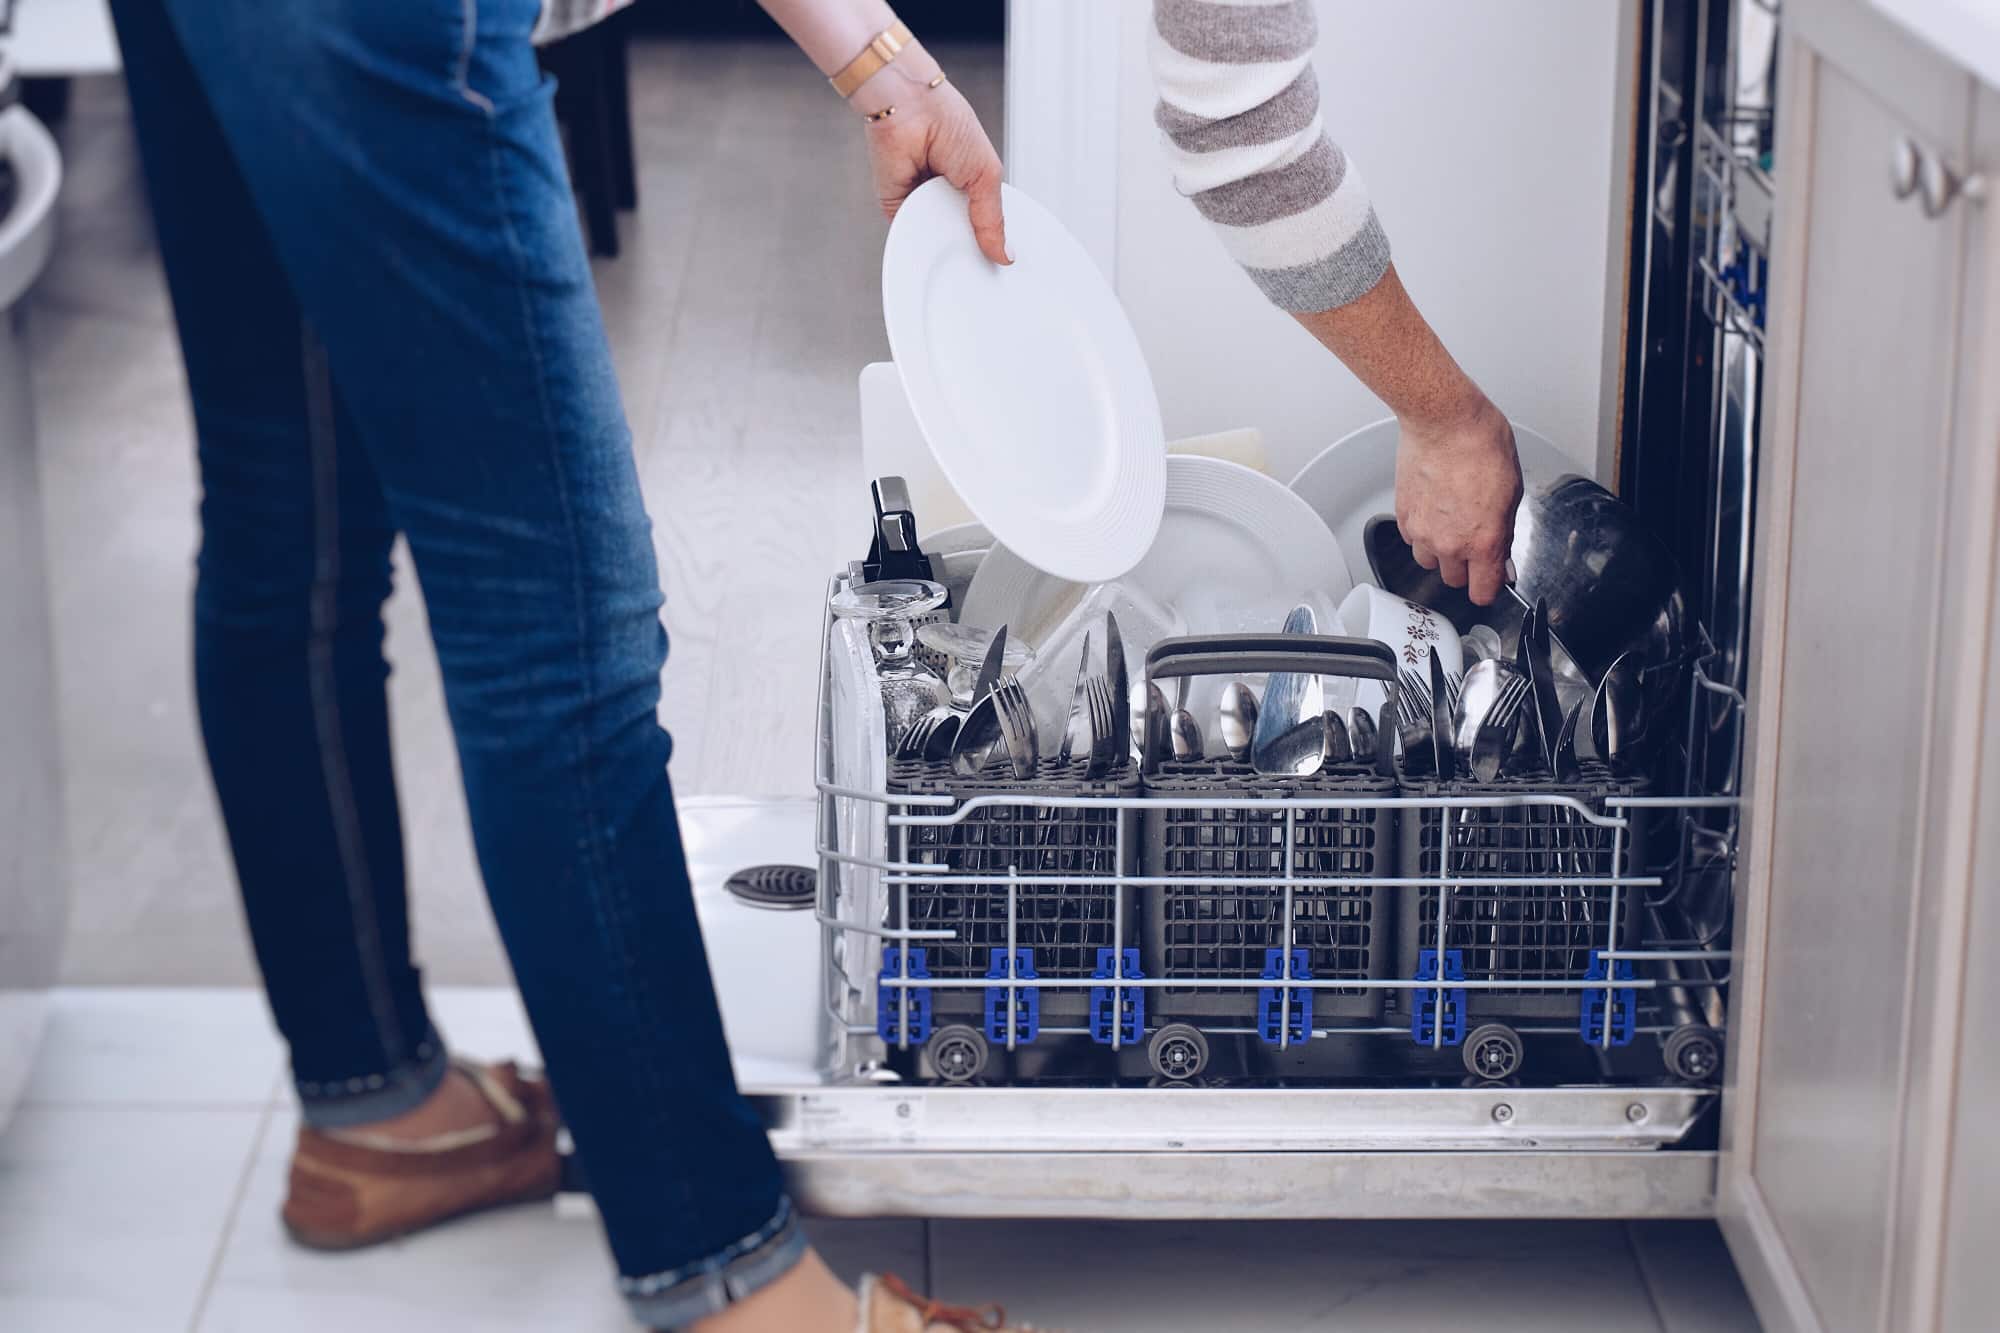 How to Maintain Your Dishwasher and Help it Last | Starfix